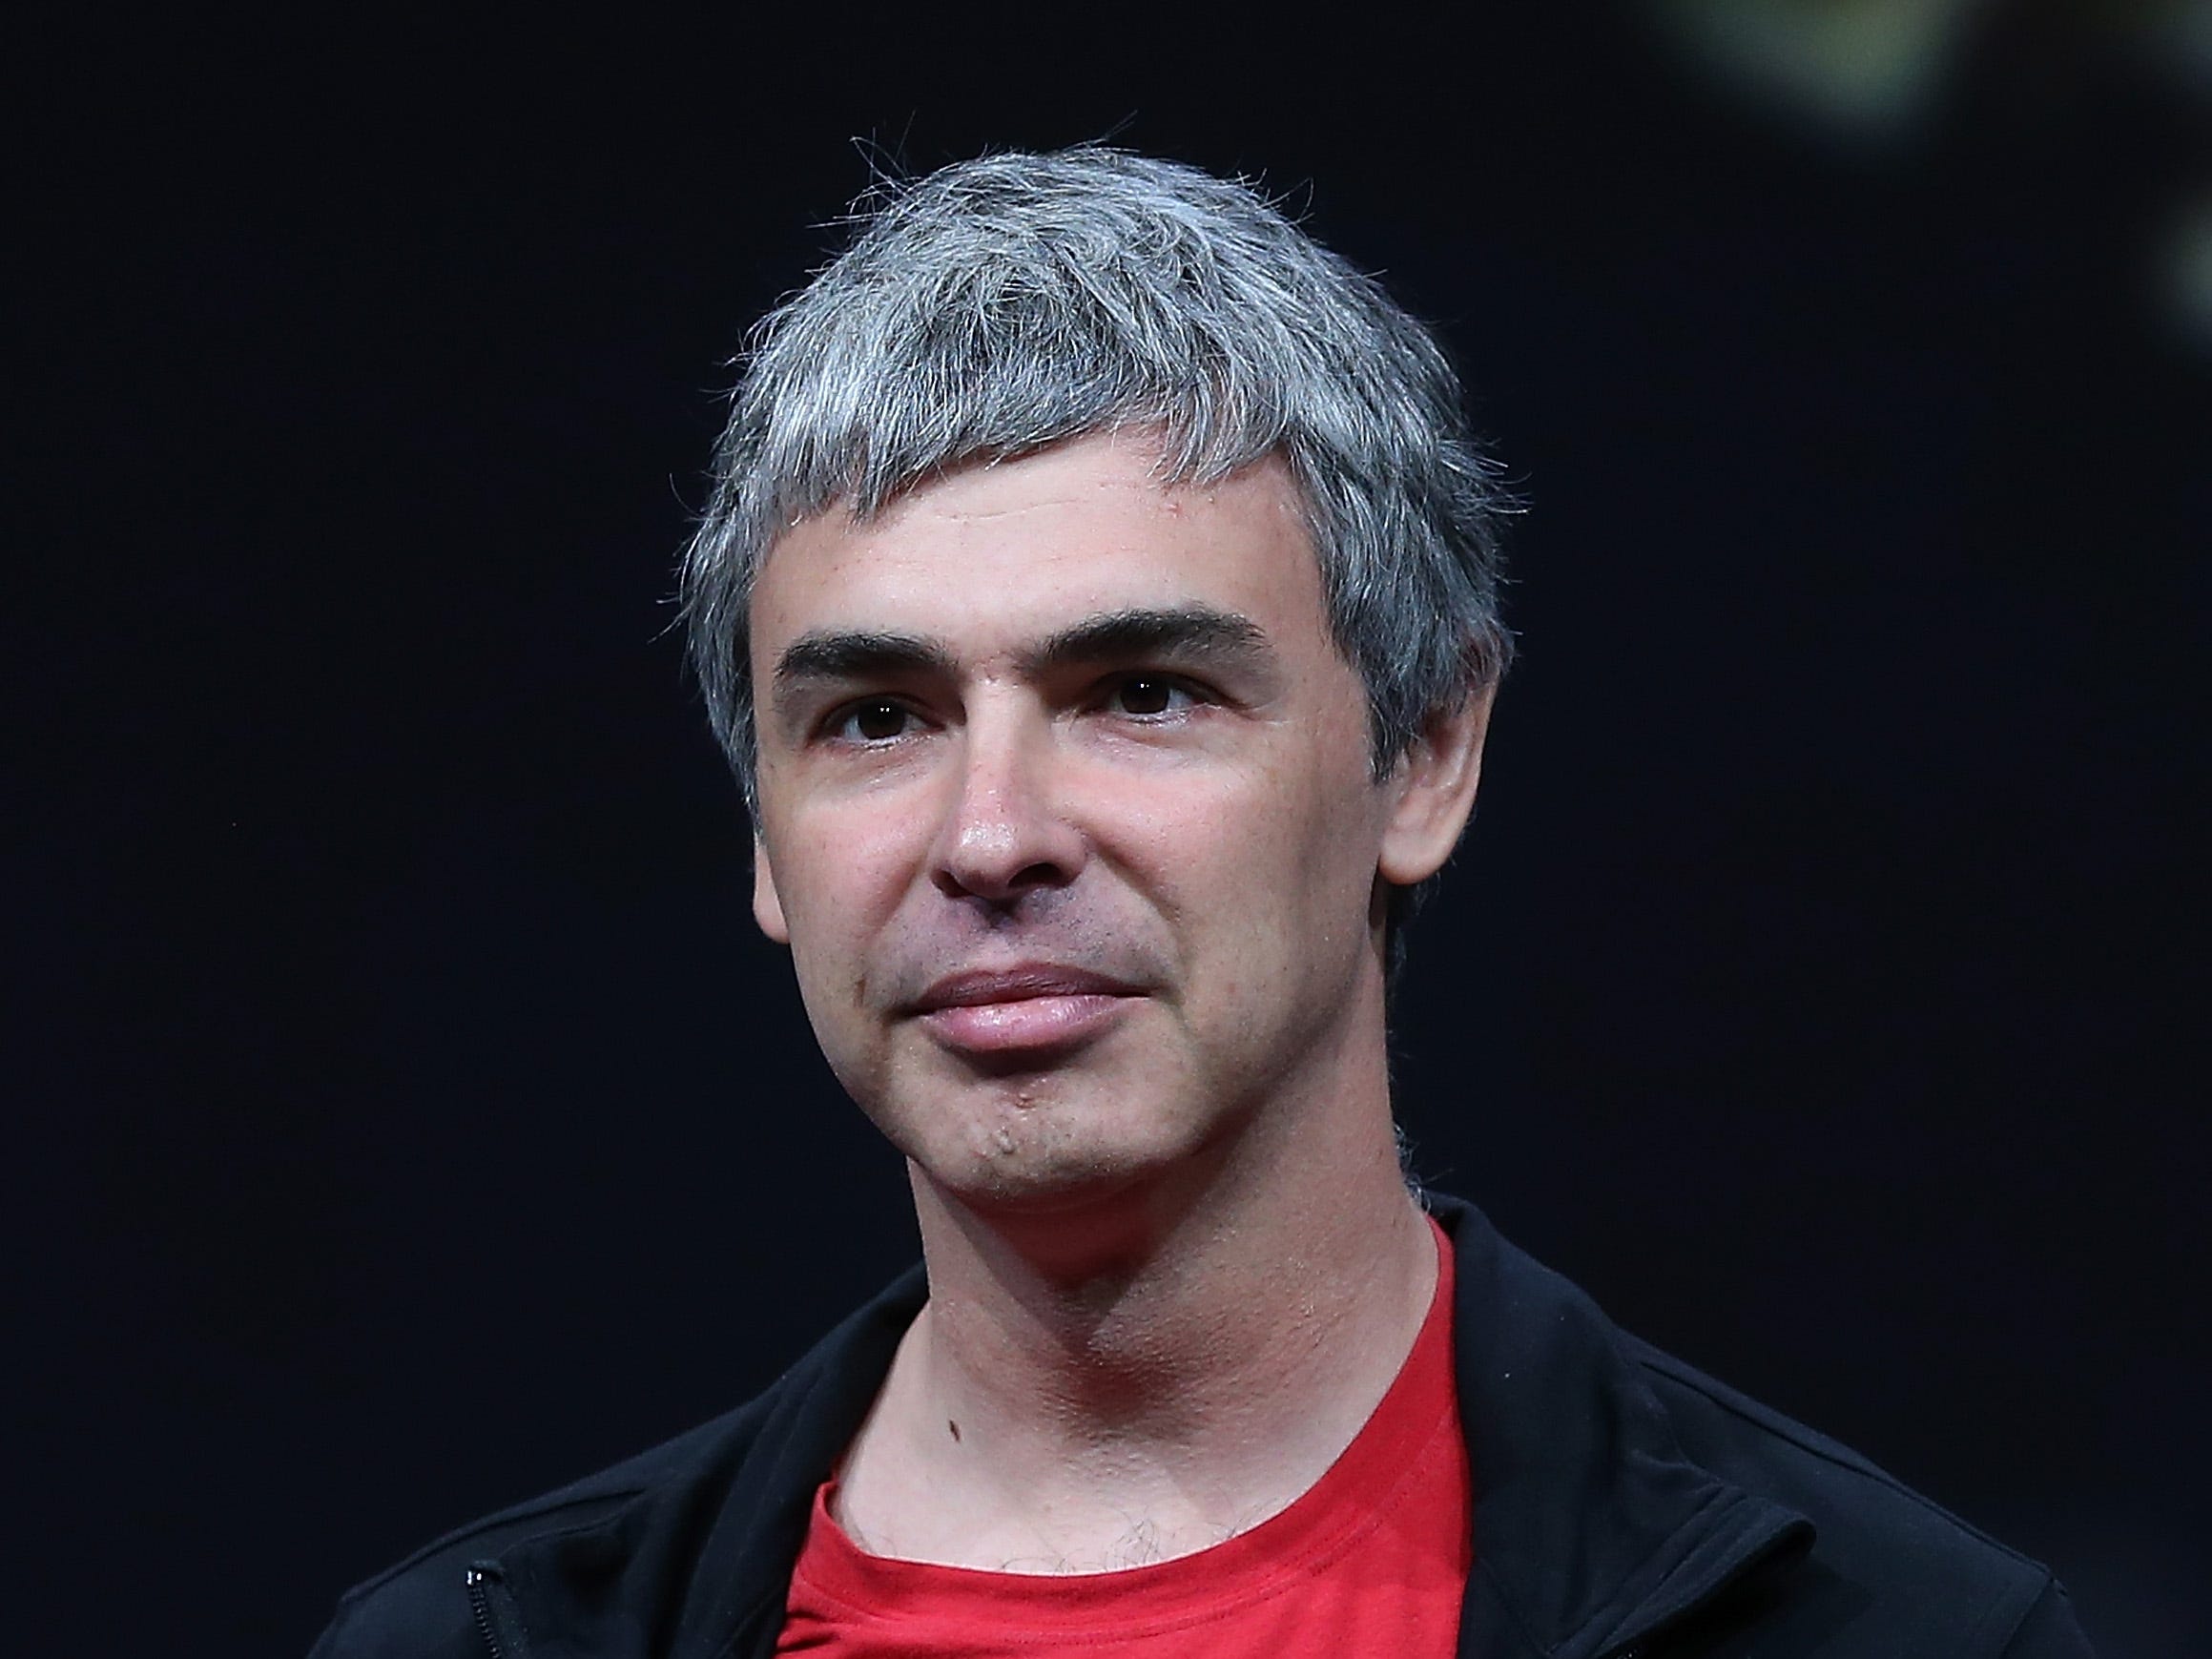 Larry Page, Google co-founder and CEO speaks during the opening keynote at the Google I/O developers conference at the Moscone Center on May 15, 2013 in San Francisco.